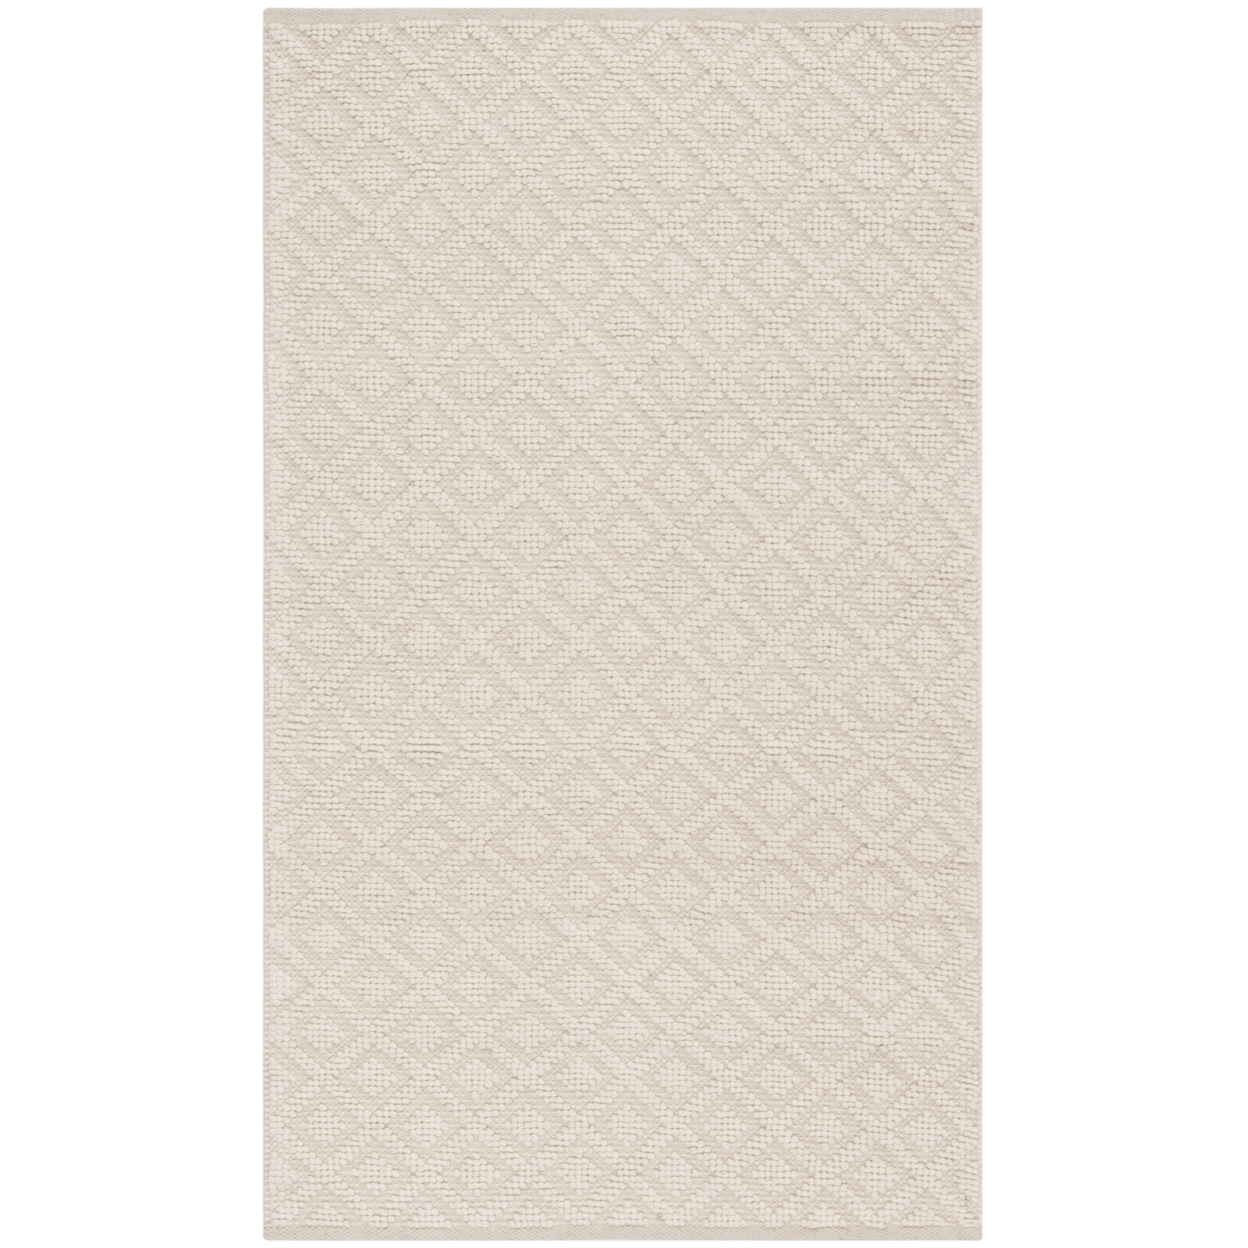 SAFAVIEH Vermont Collection VRM104A Handwoven Ivory Rug - 9 X 12